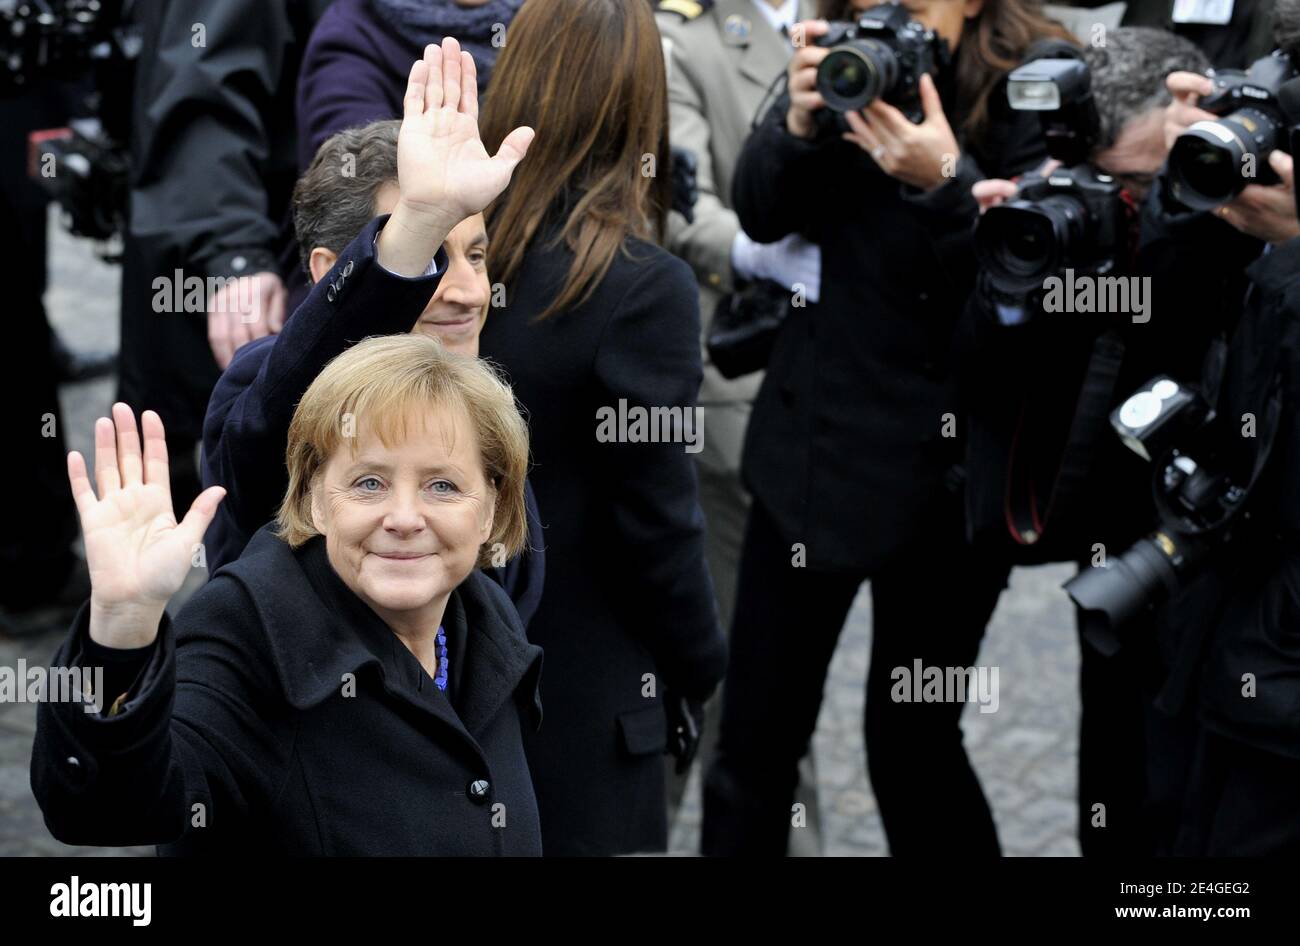 French President Nicolas Sarkozy (R) and German Chancellor Angela Merkel (C) wave to the crowd as they leave the Arc de Triomphe in Paris, on November 11, 2009 after an Armistice Day ceremony, marking the 91th anniversary of the end of World War I. Photo by Christophe Guibbaud/ABACAPRESS.COM Stock Photo